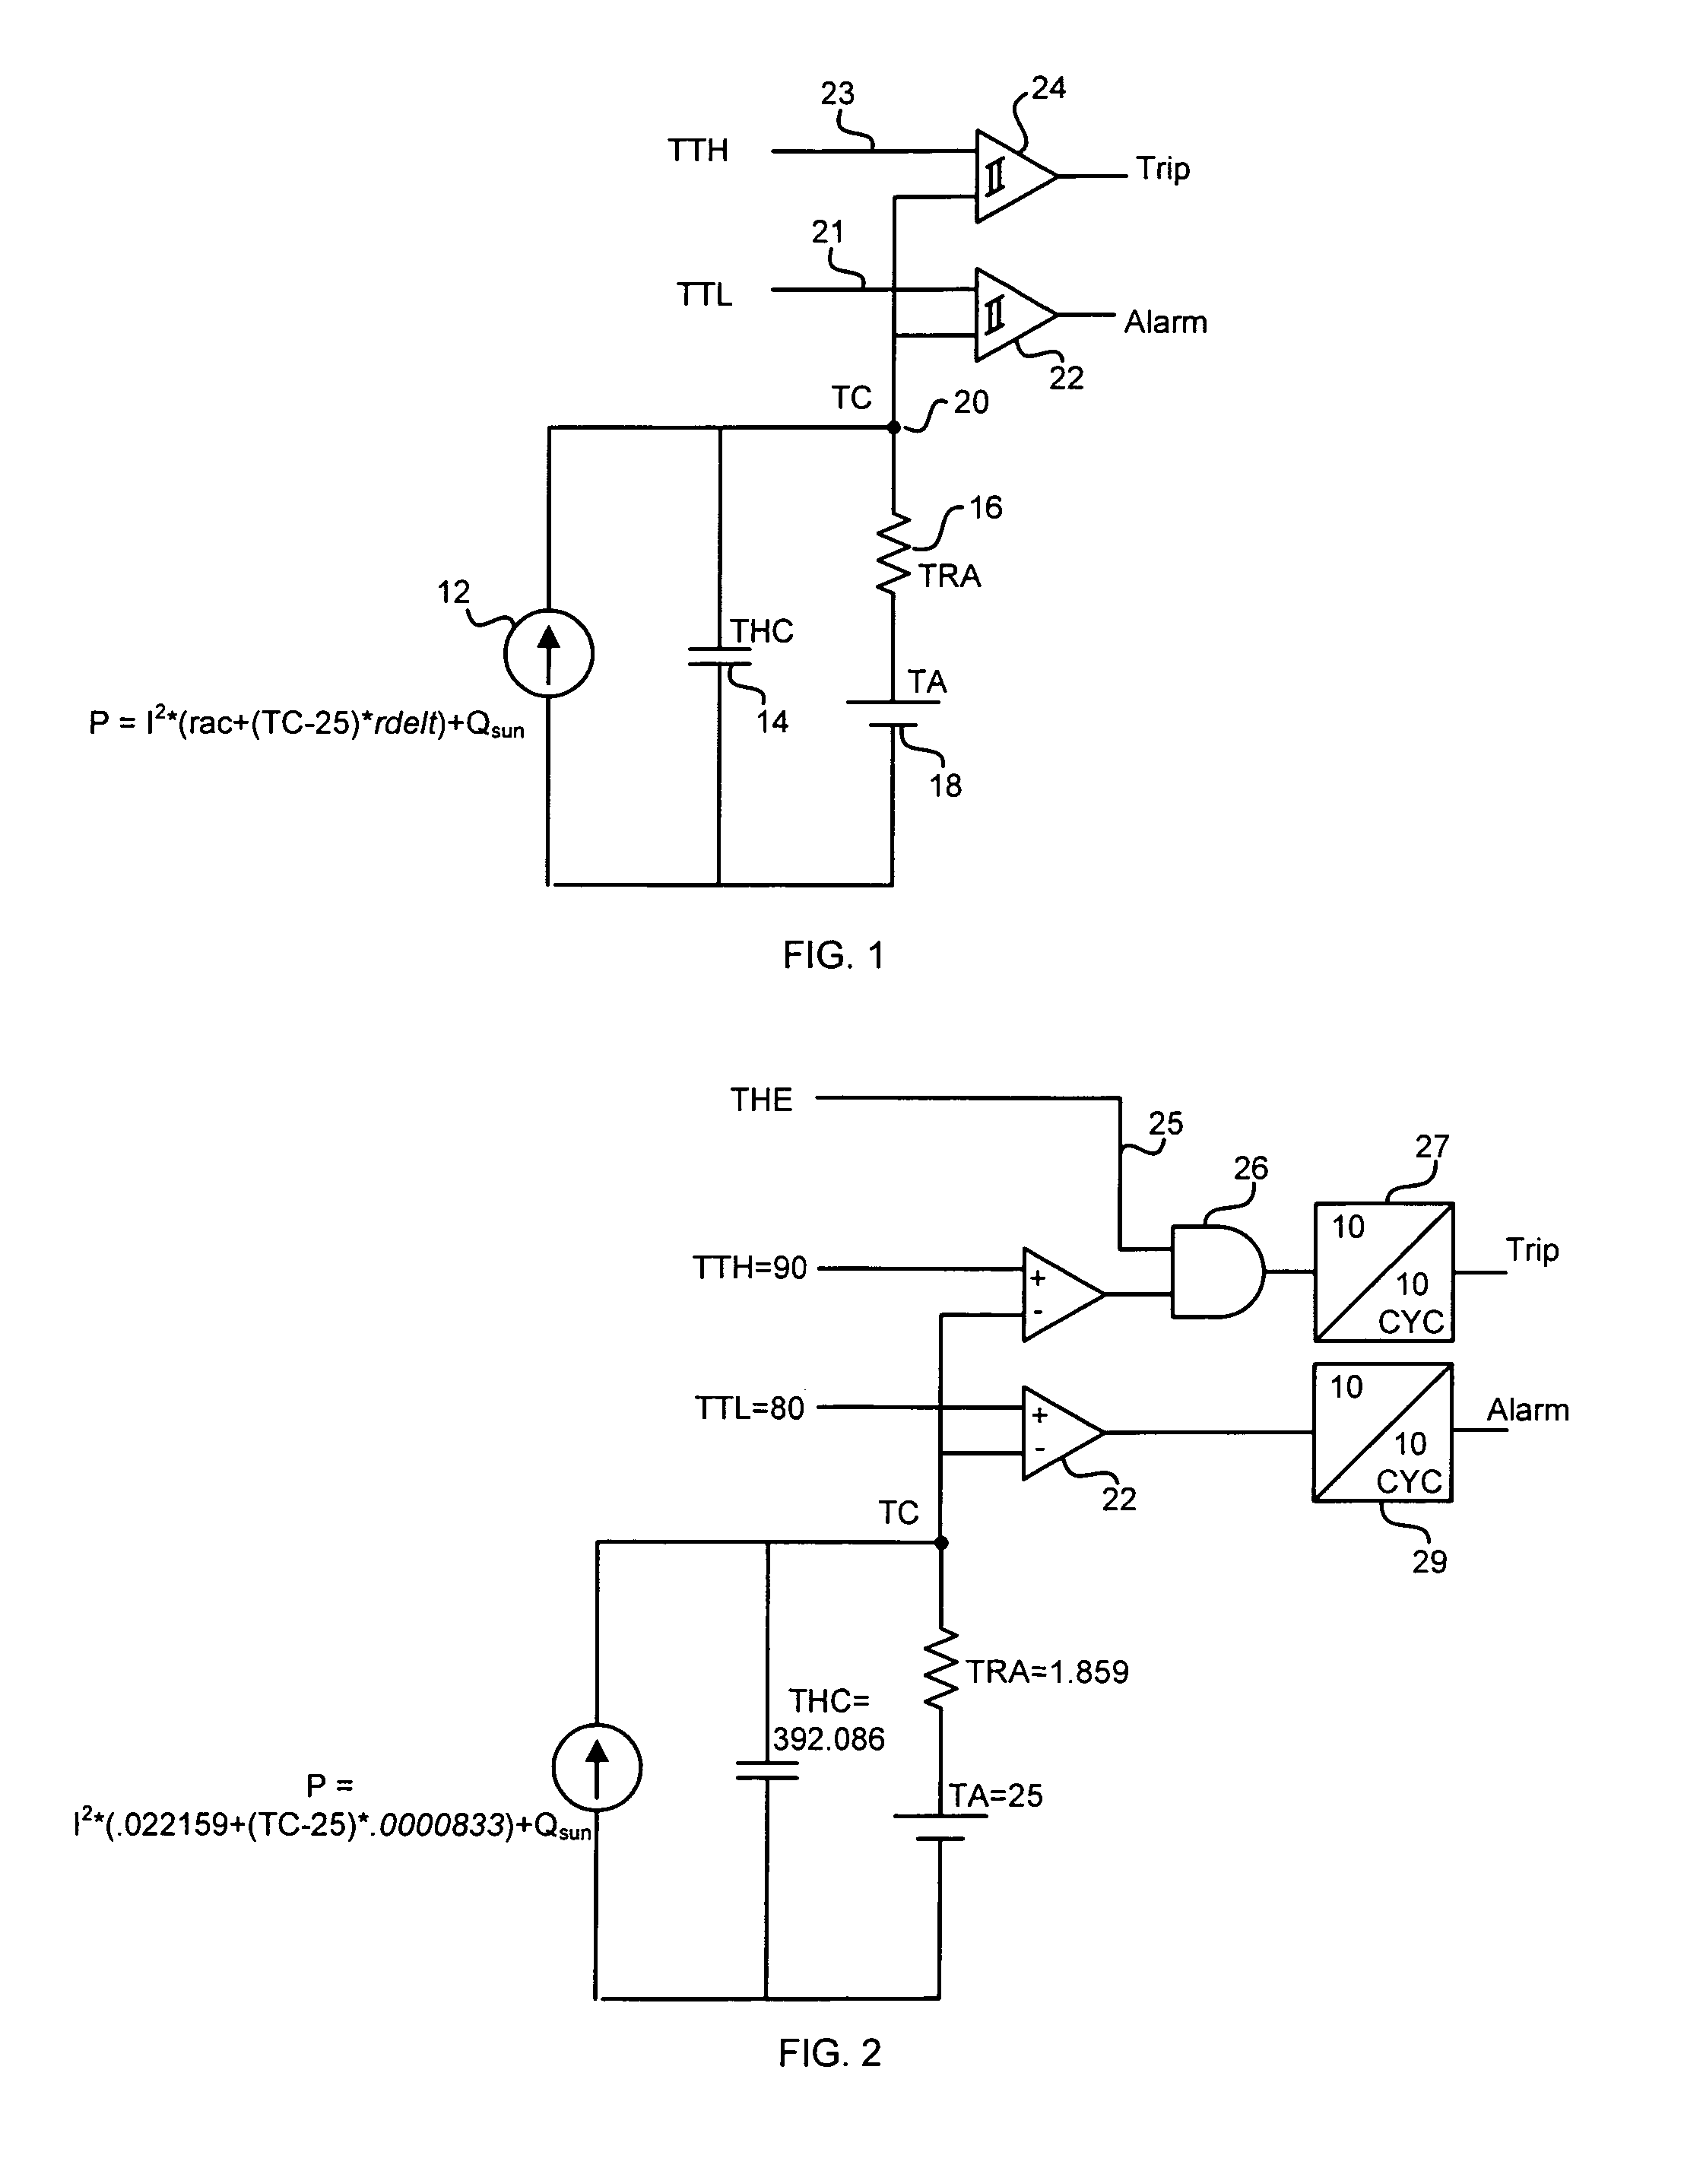 Distance protective relay using a programmable thermal model for thermal protection